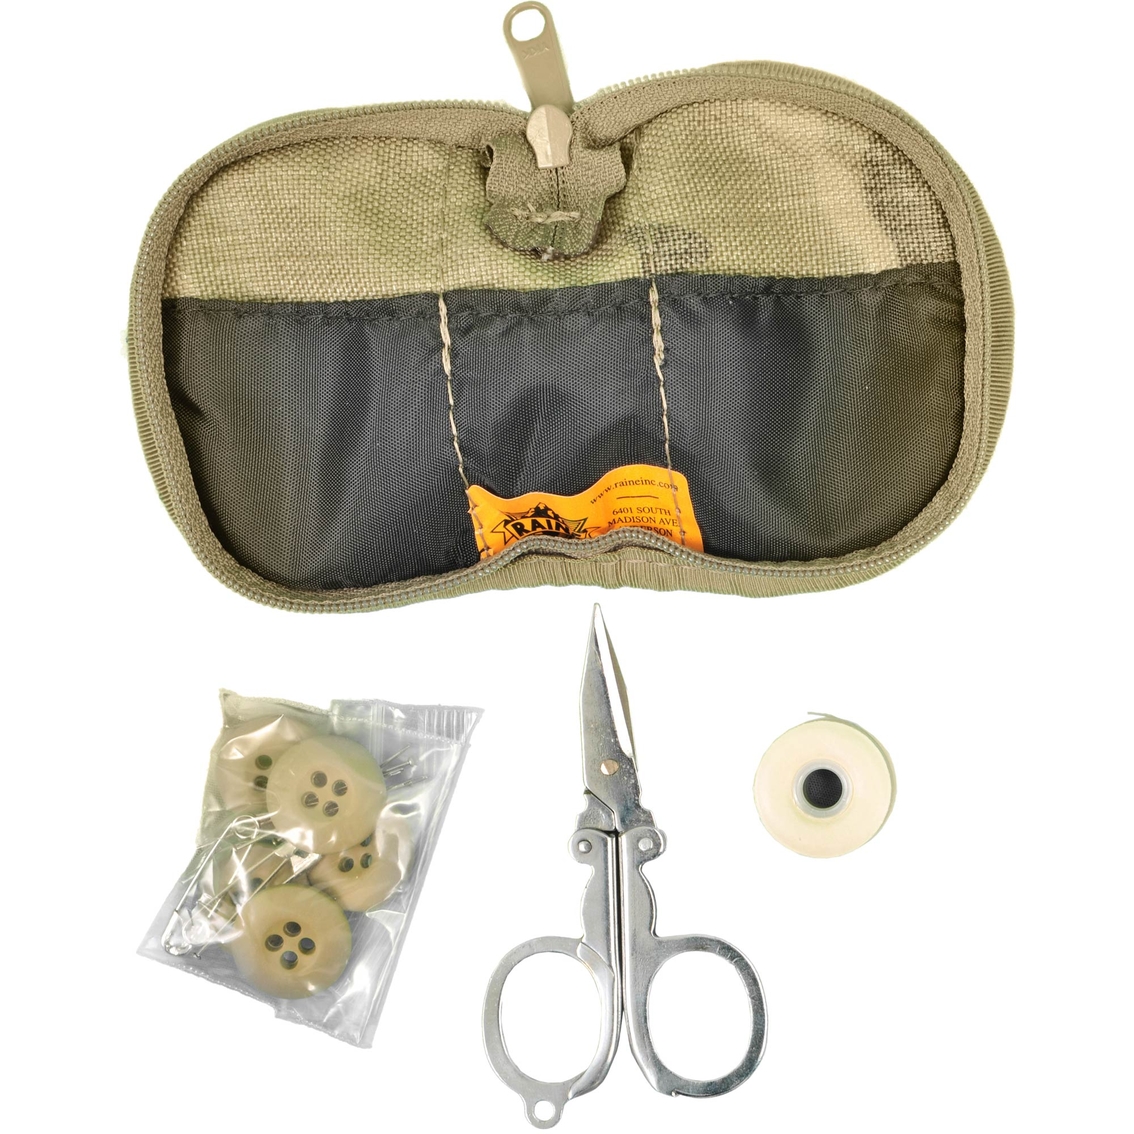 WEB-TEX ARMY S95 SEWING KIT THREAD NEEDLES SCISSORS HOUSEWIFE MTP DPM CAMO  POUCH